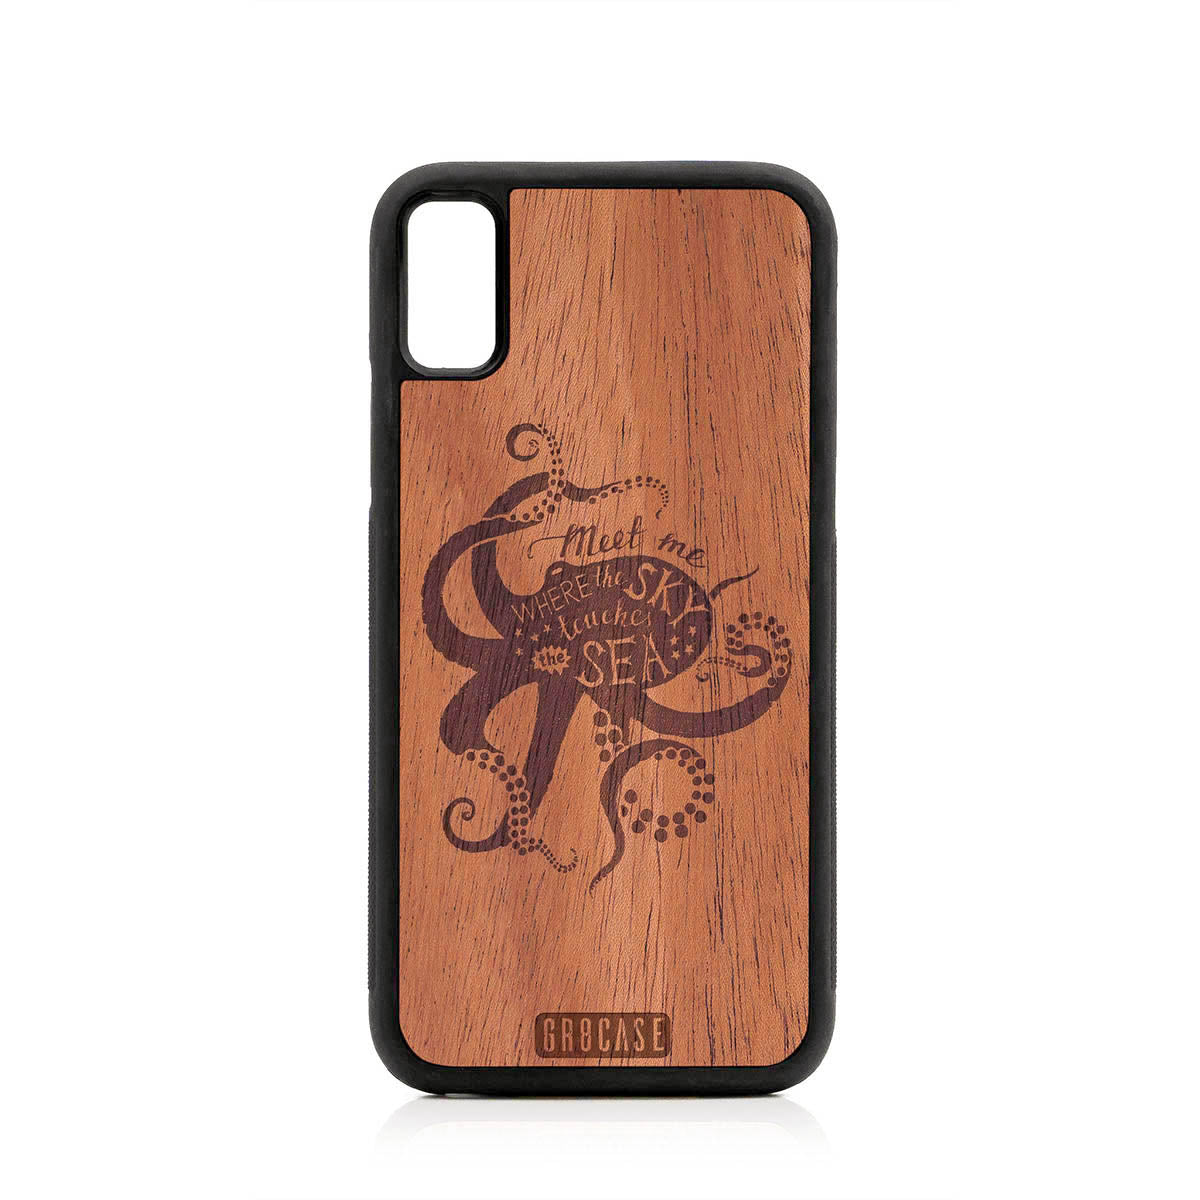 Meet Me Where The Sky Touches The Sea (Octopus) Design Wood Case For iPhone X/XS